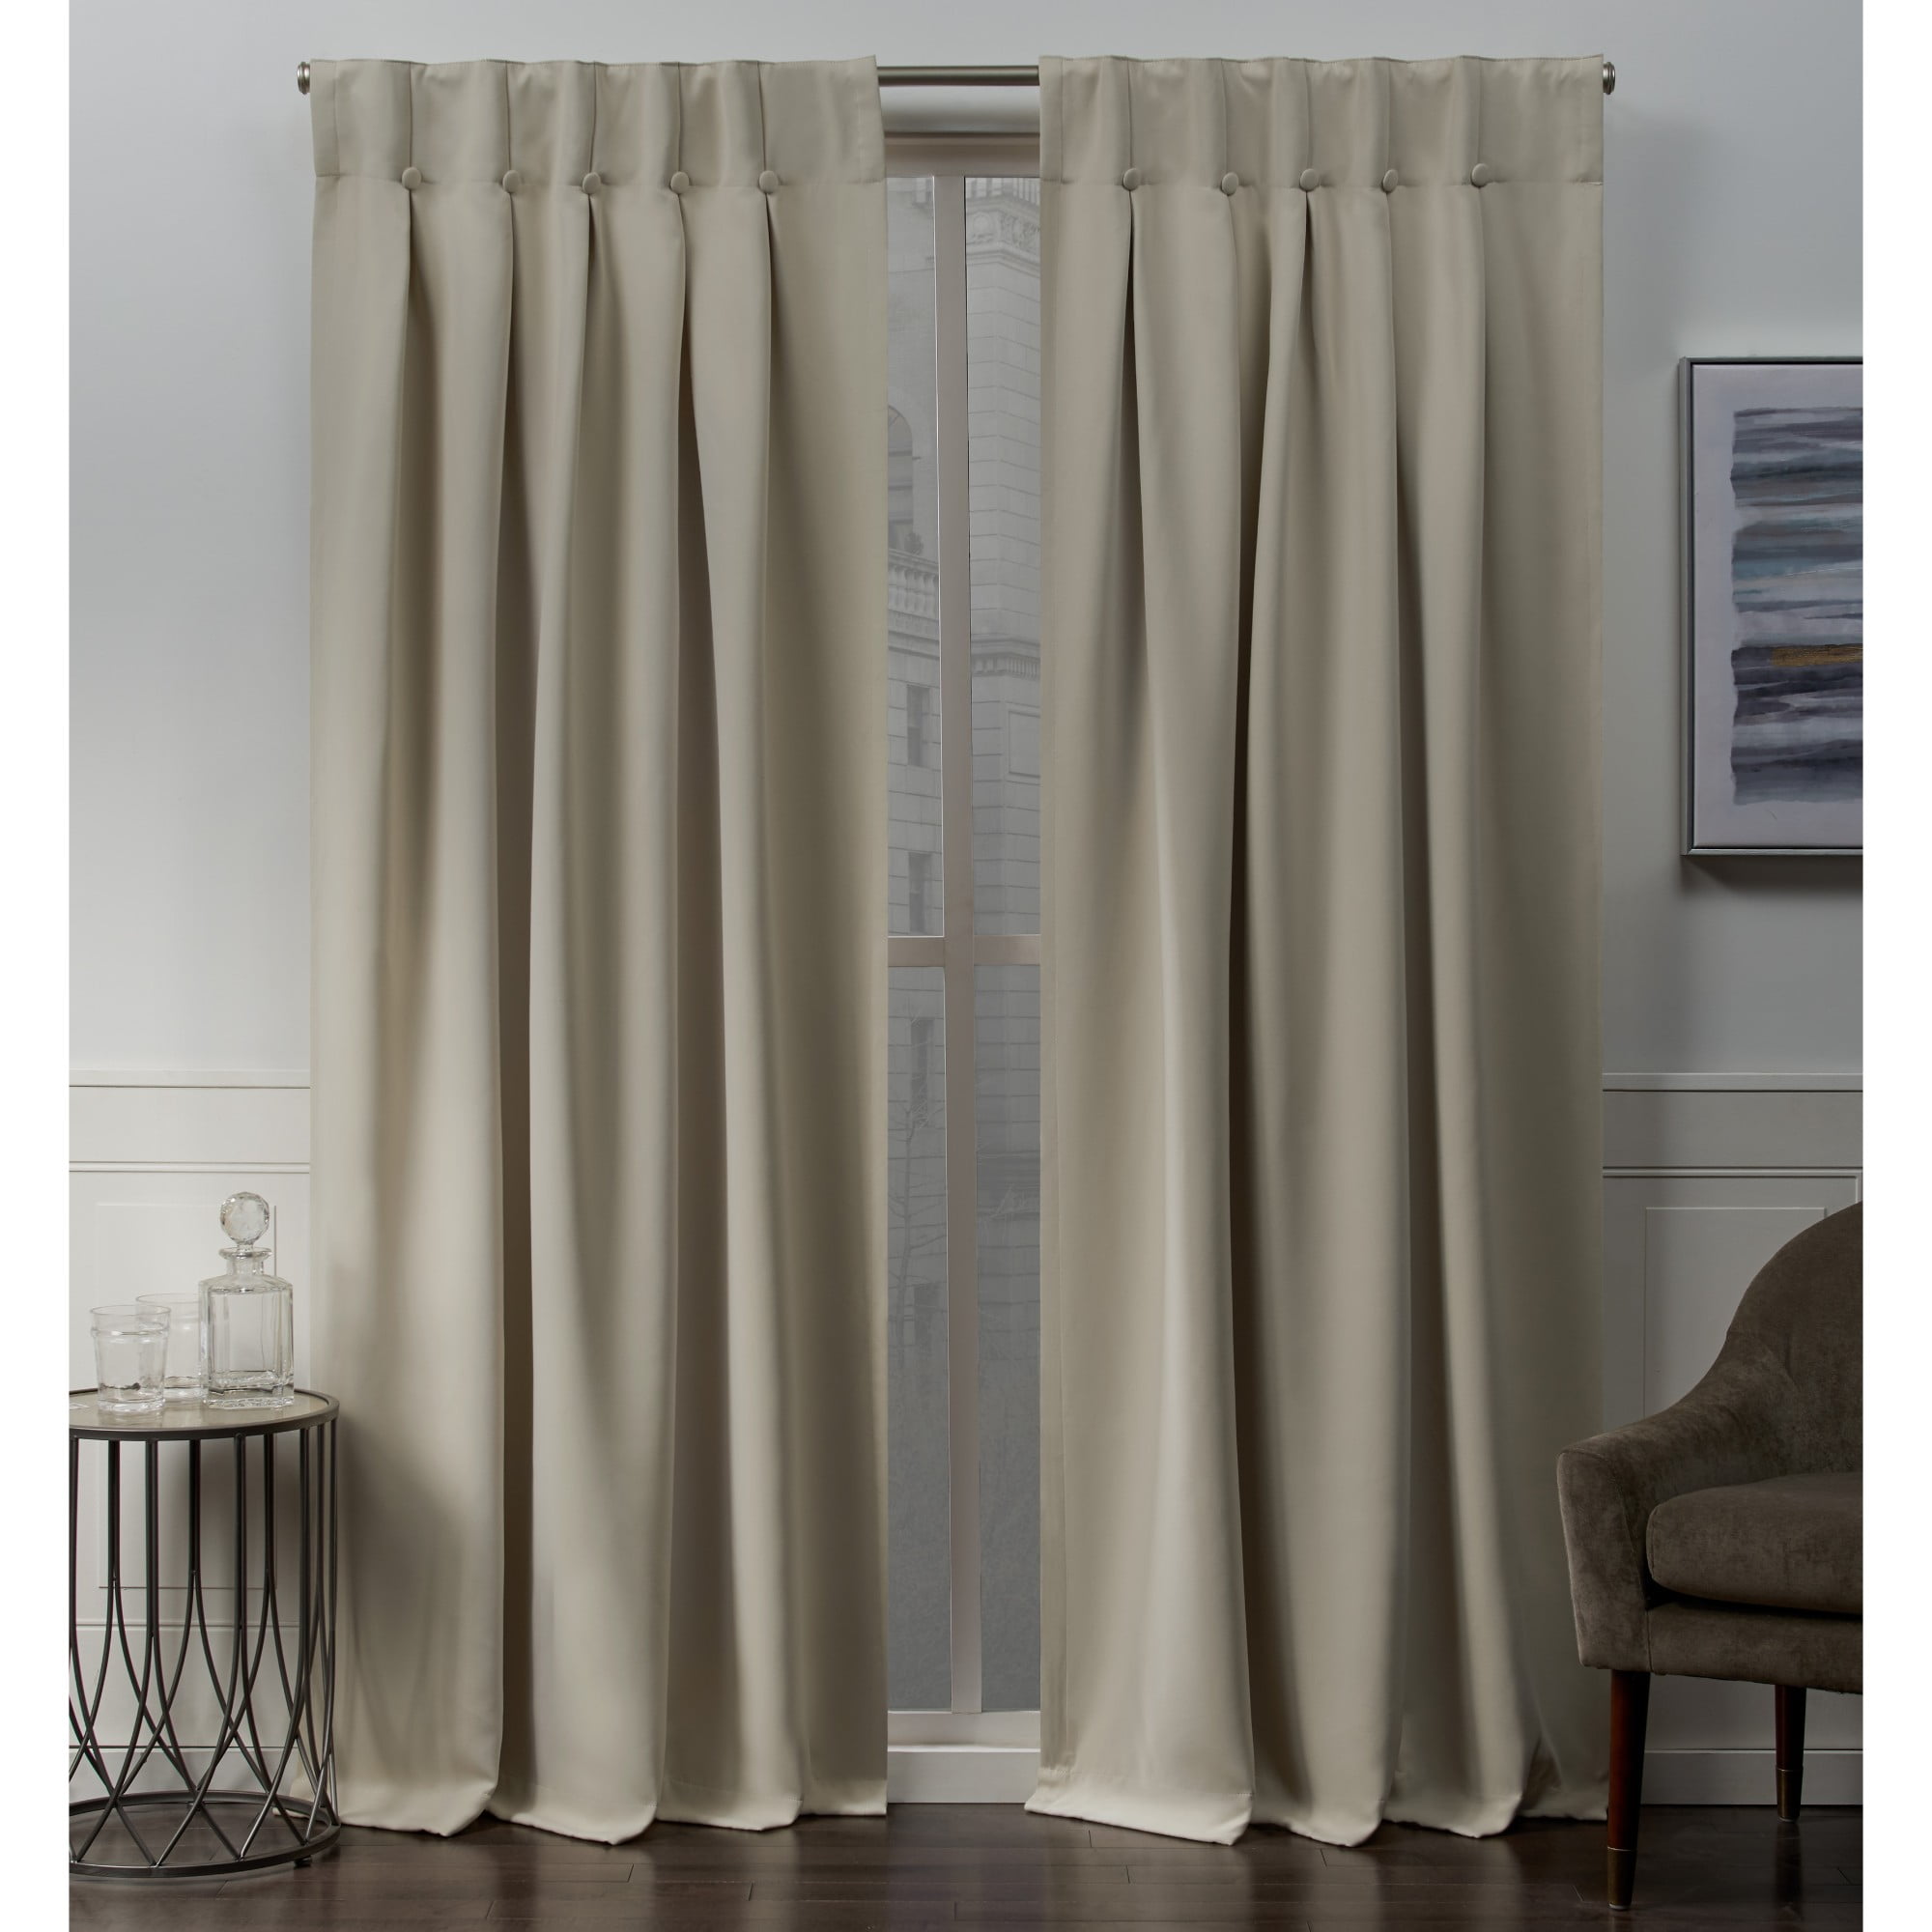 PAIRS OF OATMEAL NATURAL LINEN TWILL LOOK THERMAL TAPE TOP BLACK OUT CURTAINS 